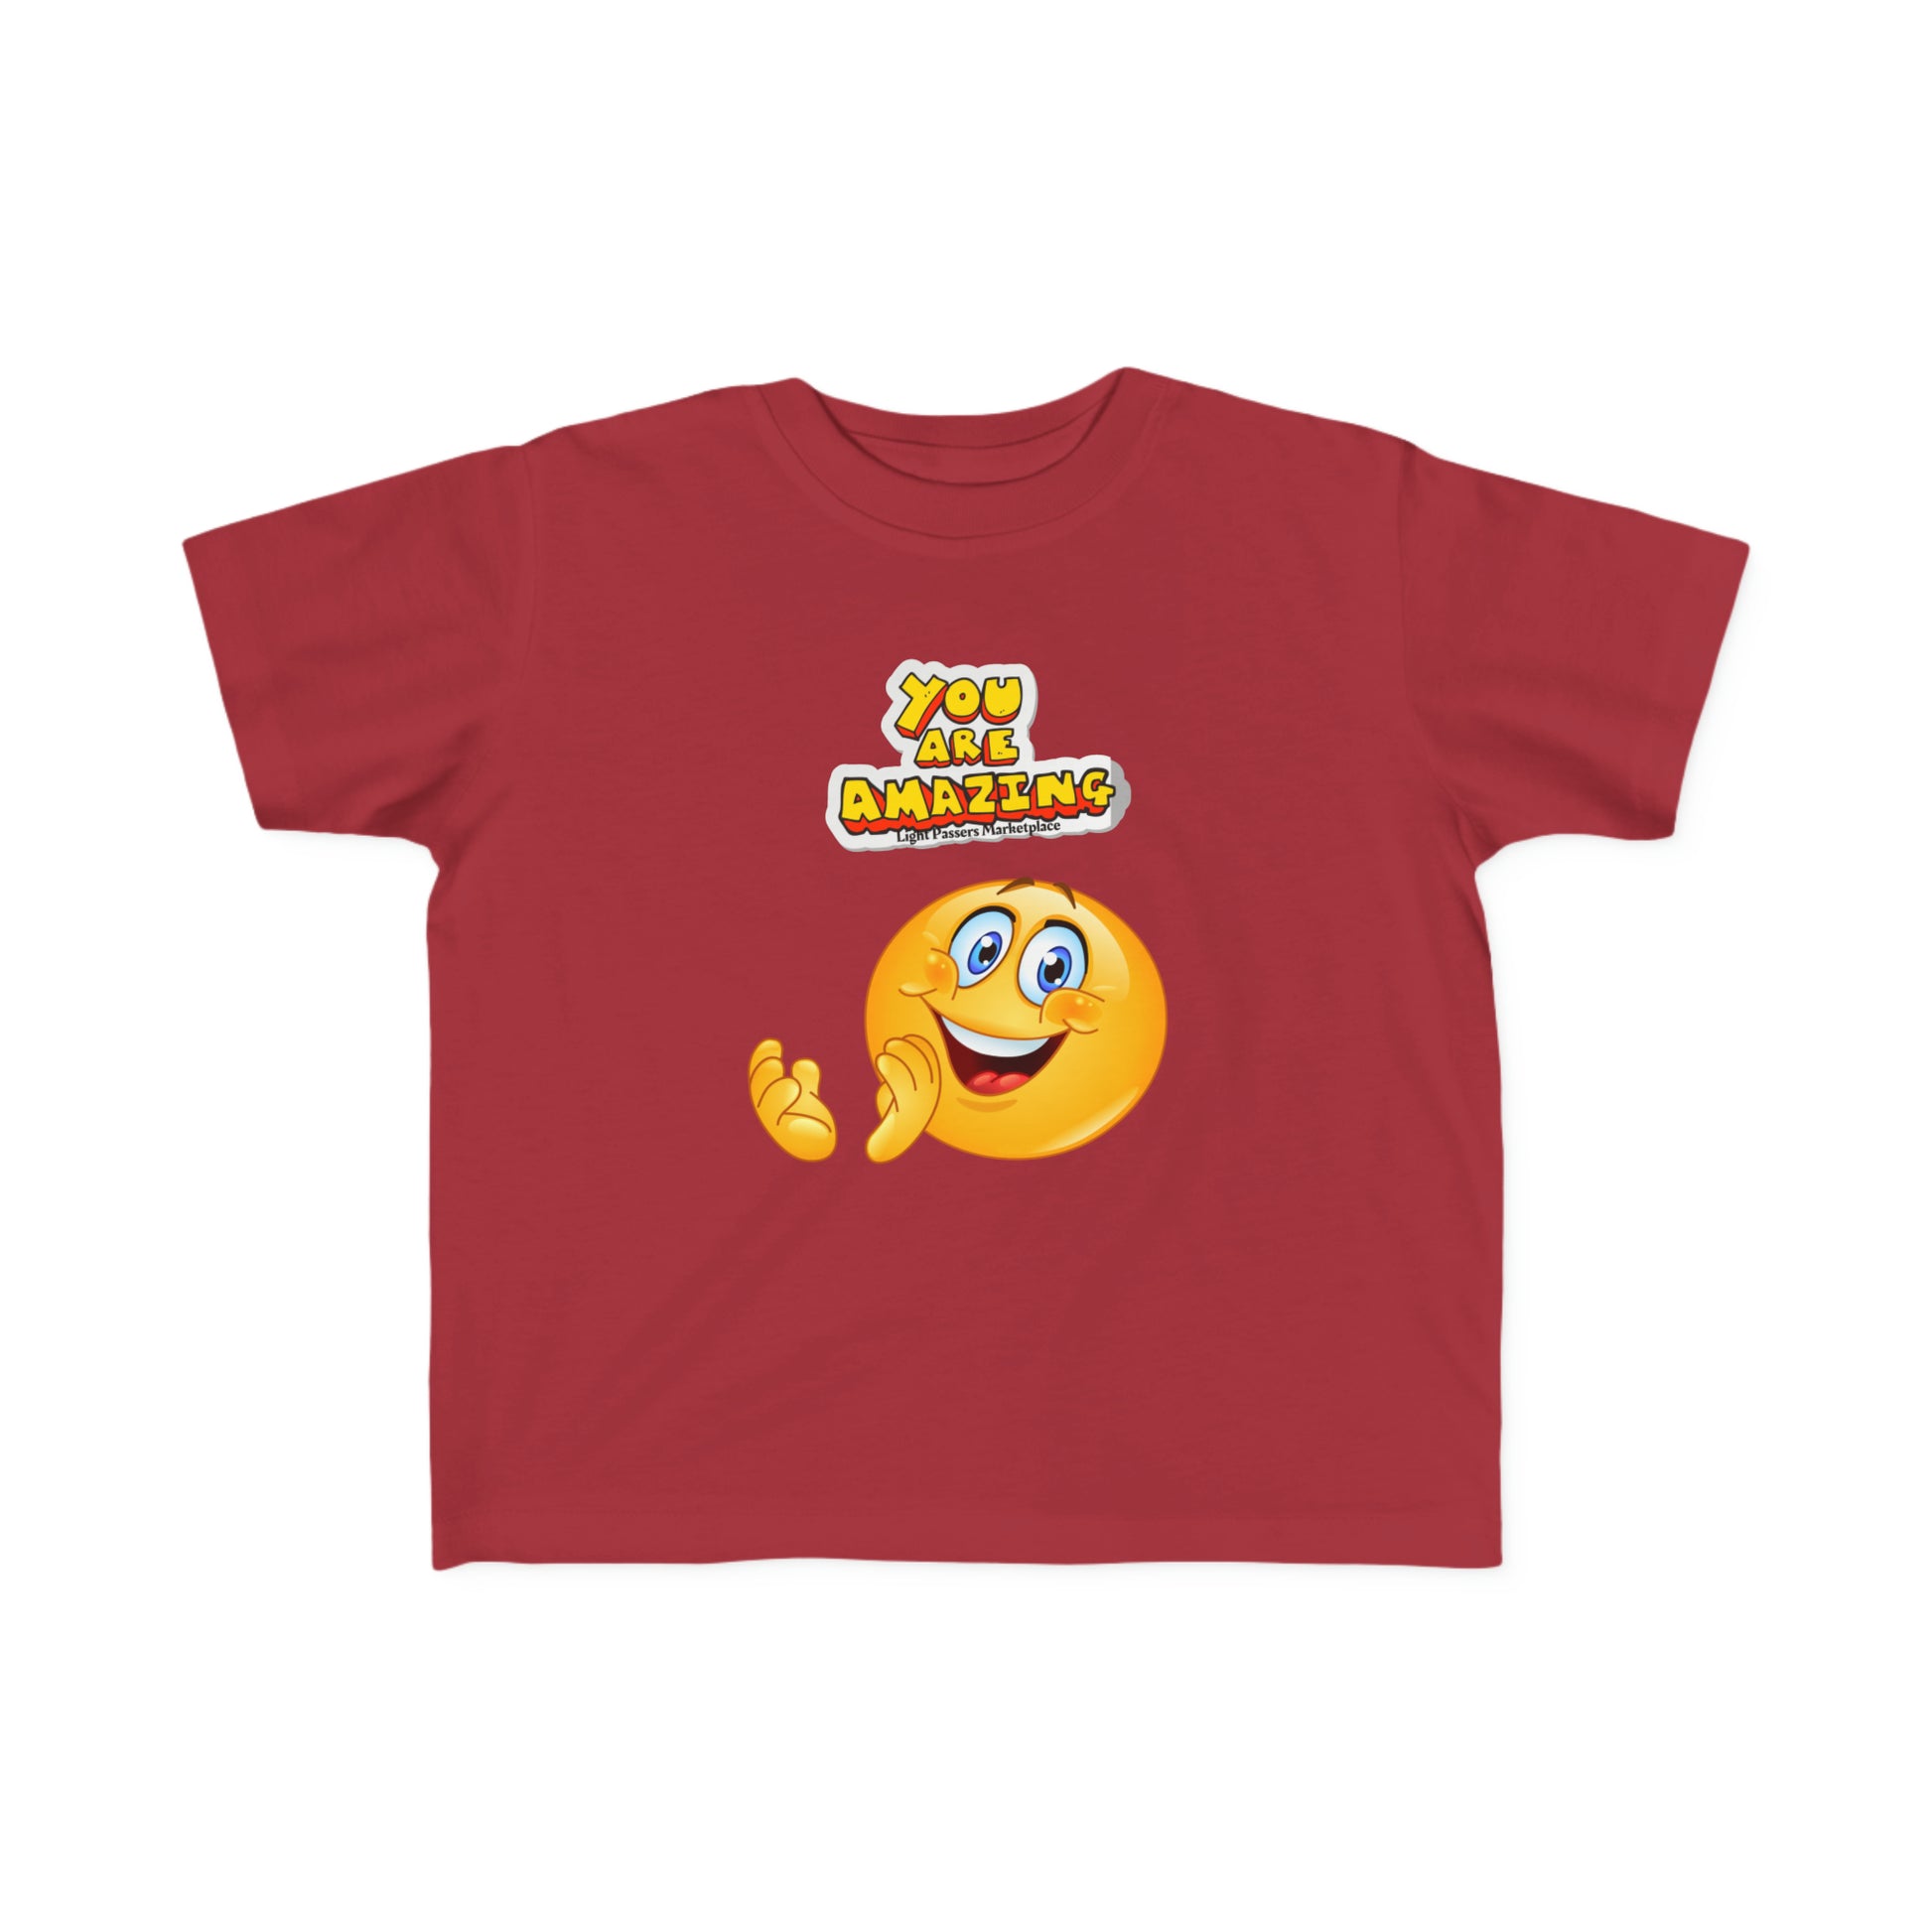 A red toddler t-shirt featuring a cartoon face design, made of soft 100% combed cotton. Durable print, light fabric, tear-away label, classic fit, true to size.